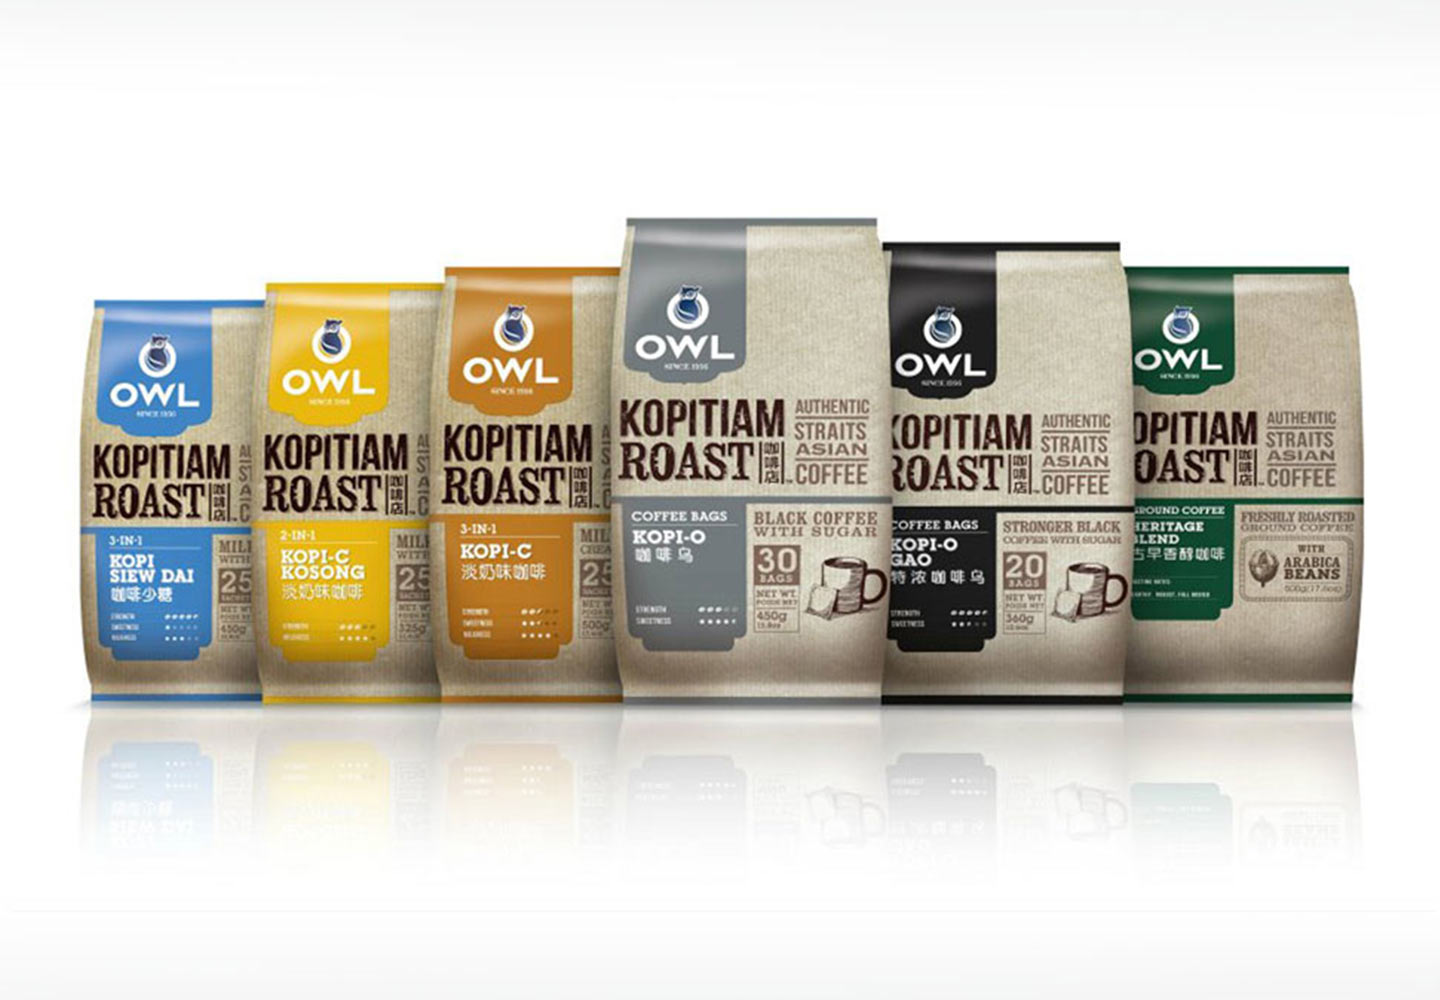 Brand Consultancy in FMCG Industry. Packaging design for OWL.